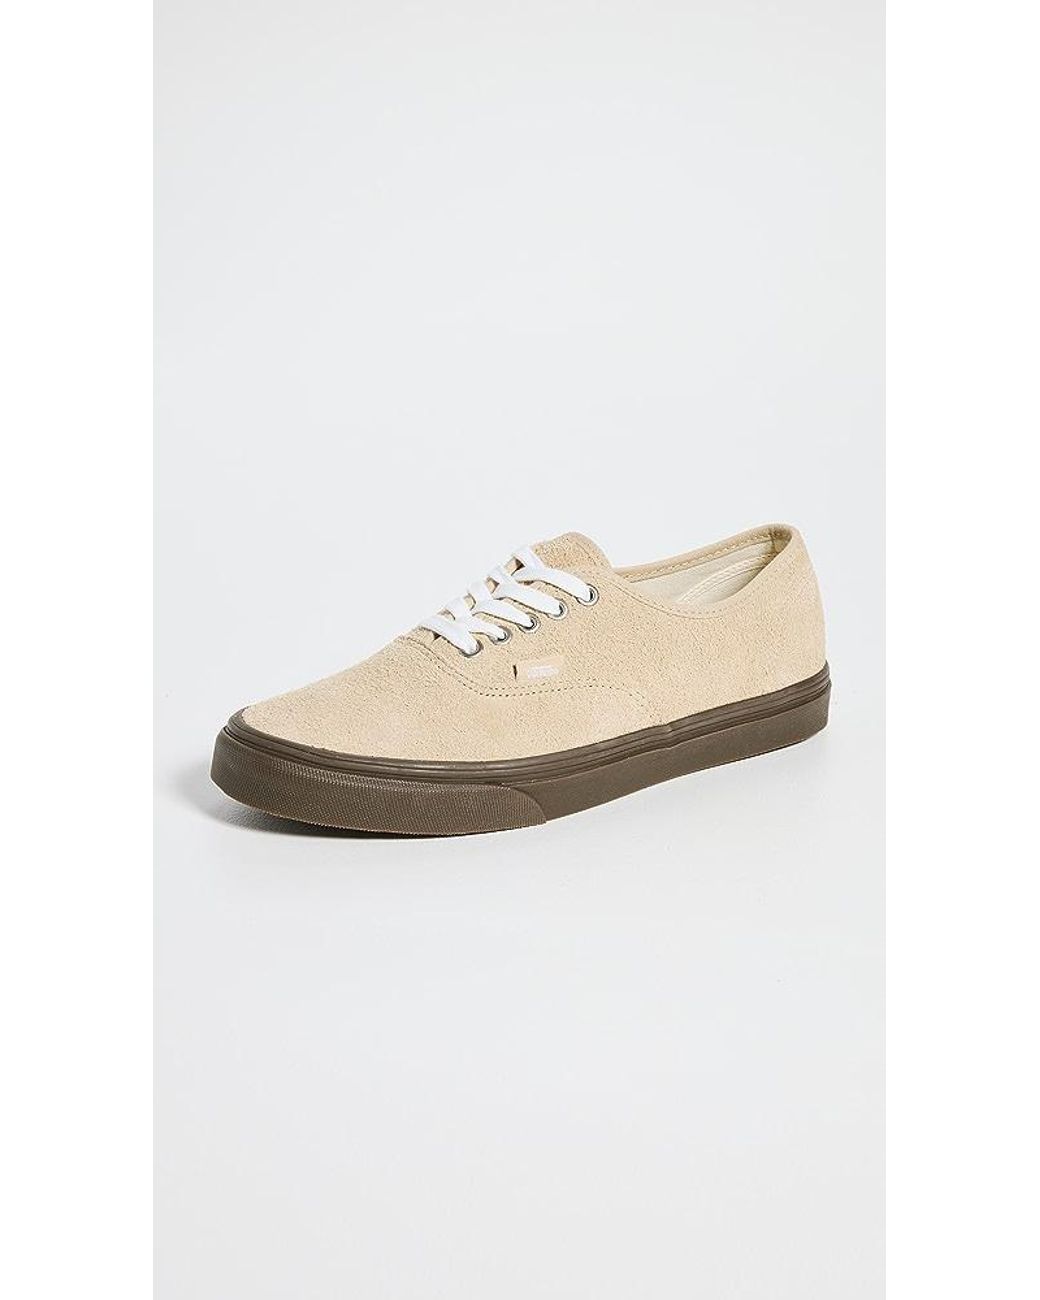 Vans Authentic Hairy Suede Sneakers in White for Men | Lyst